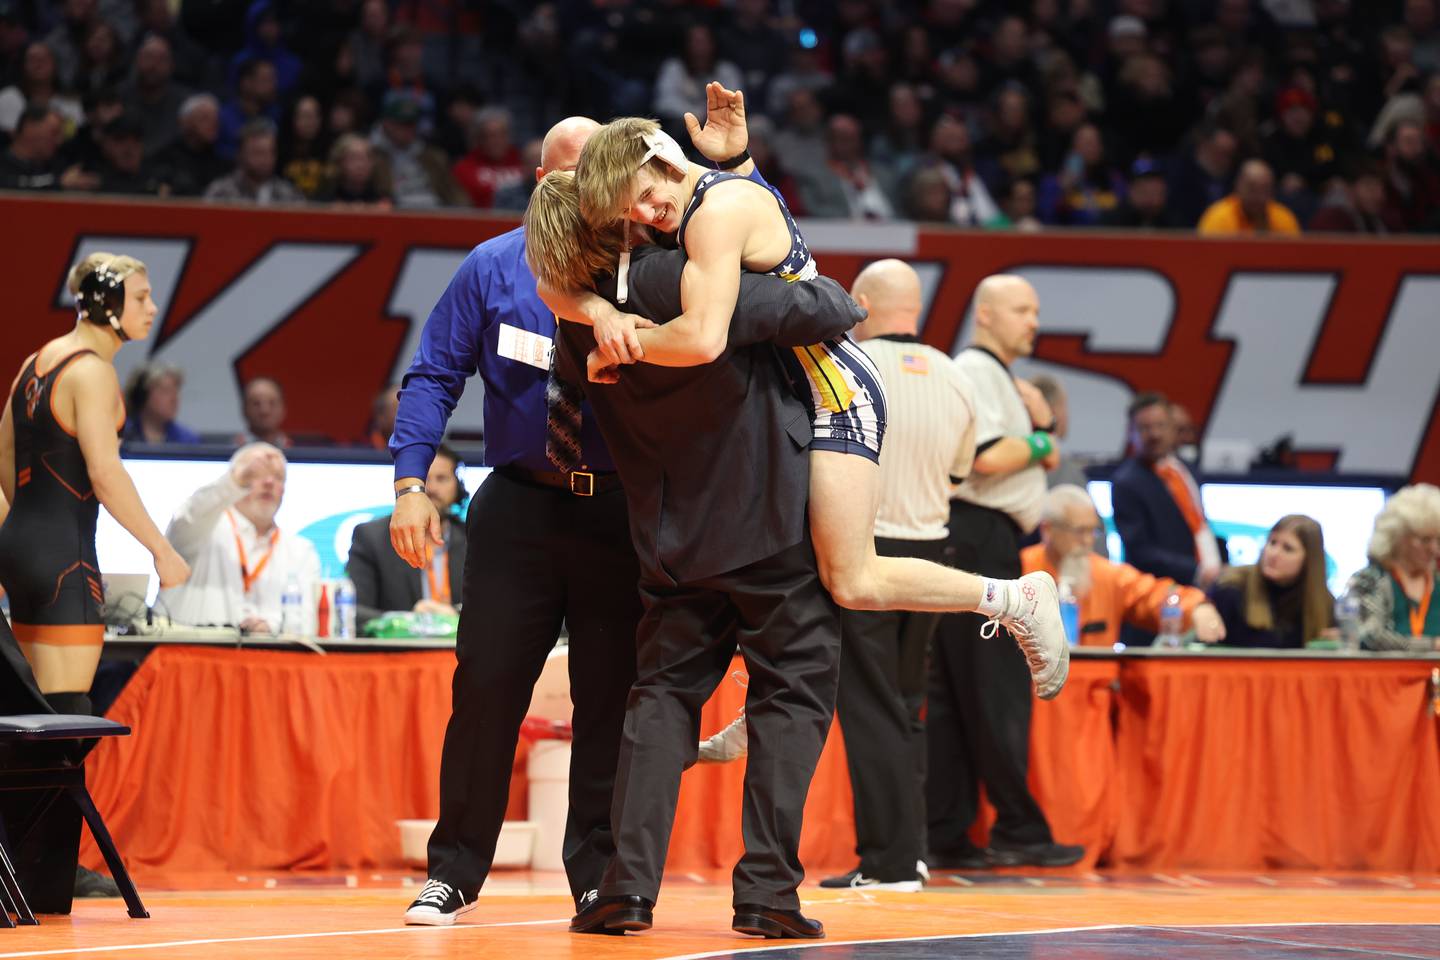 Yorkville Christian’s Ty Edwards jumps into the arms of his coach after his win over Galesburg’s Sauge Shipp in the 132-pound Class 2A state championship match on Saturday, Feb. 17th, 2024 in Champaign.